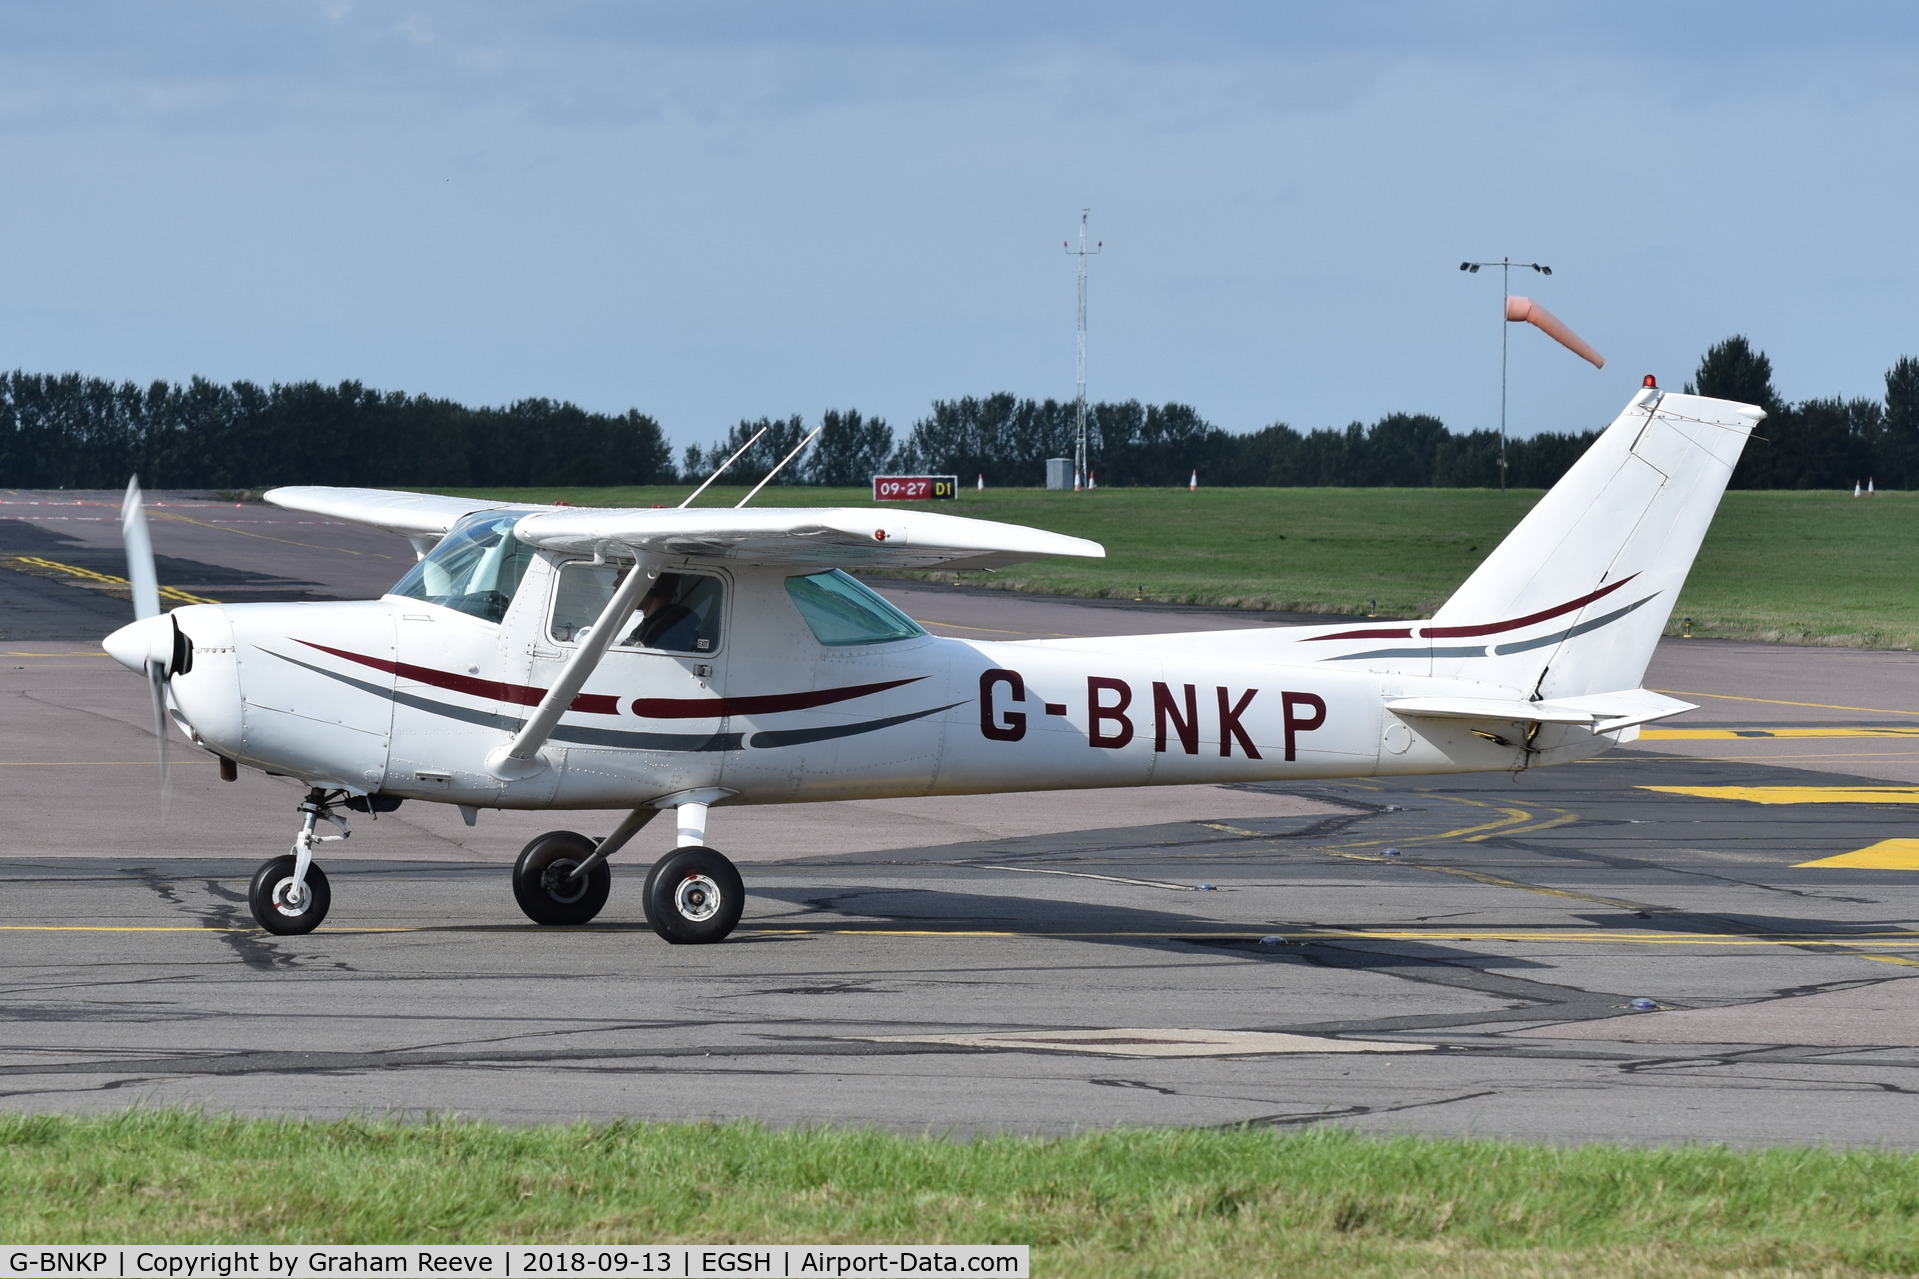 G-BNKP, 1978 Cessna 152 C/N 152-81286, Just landed at Norwich.